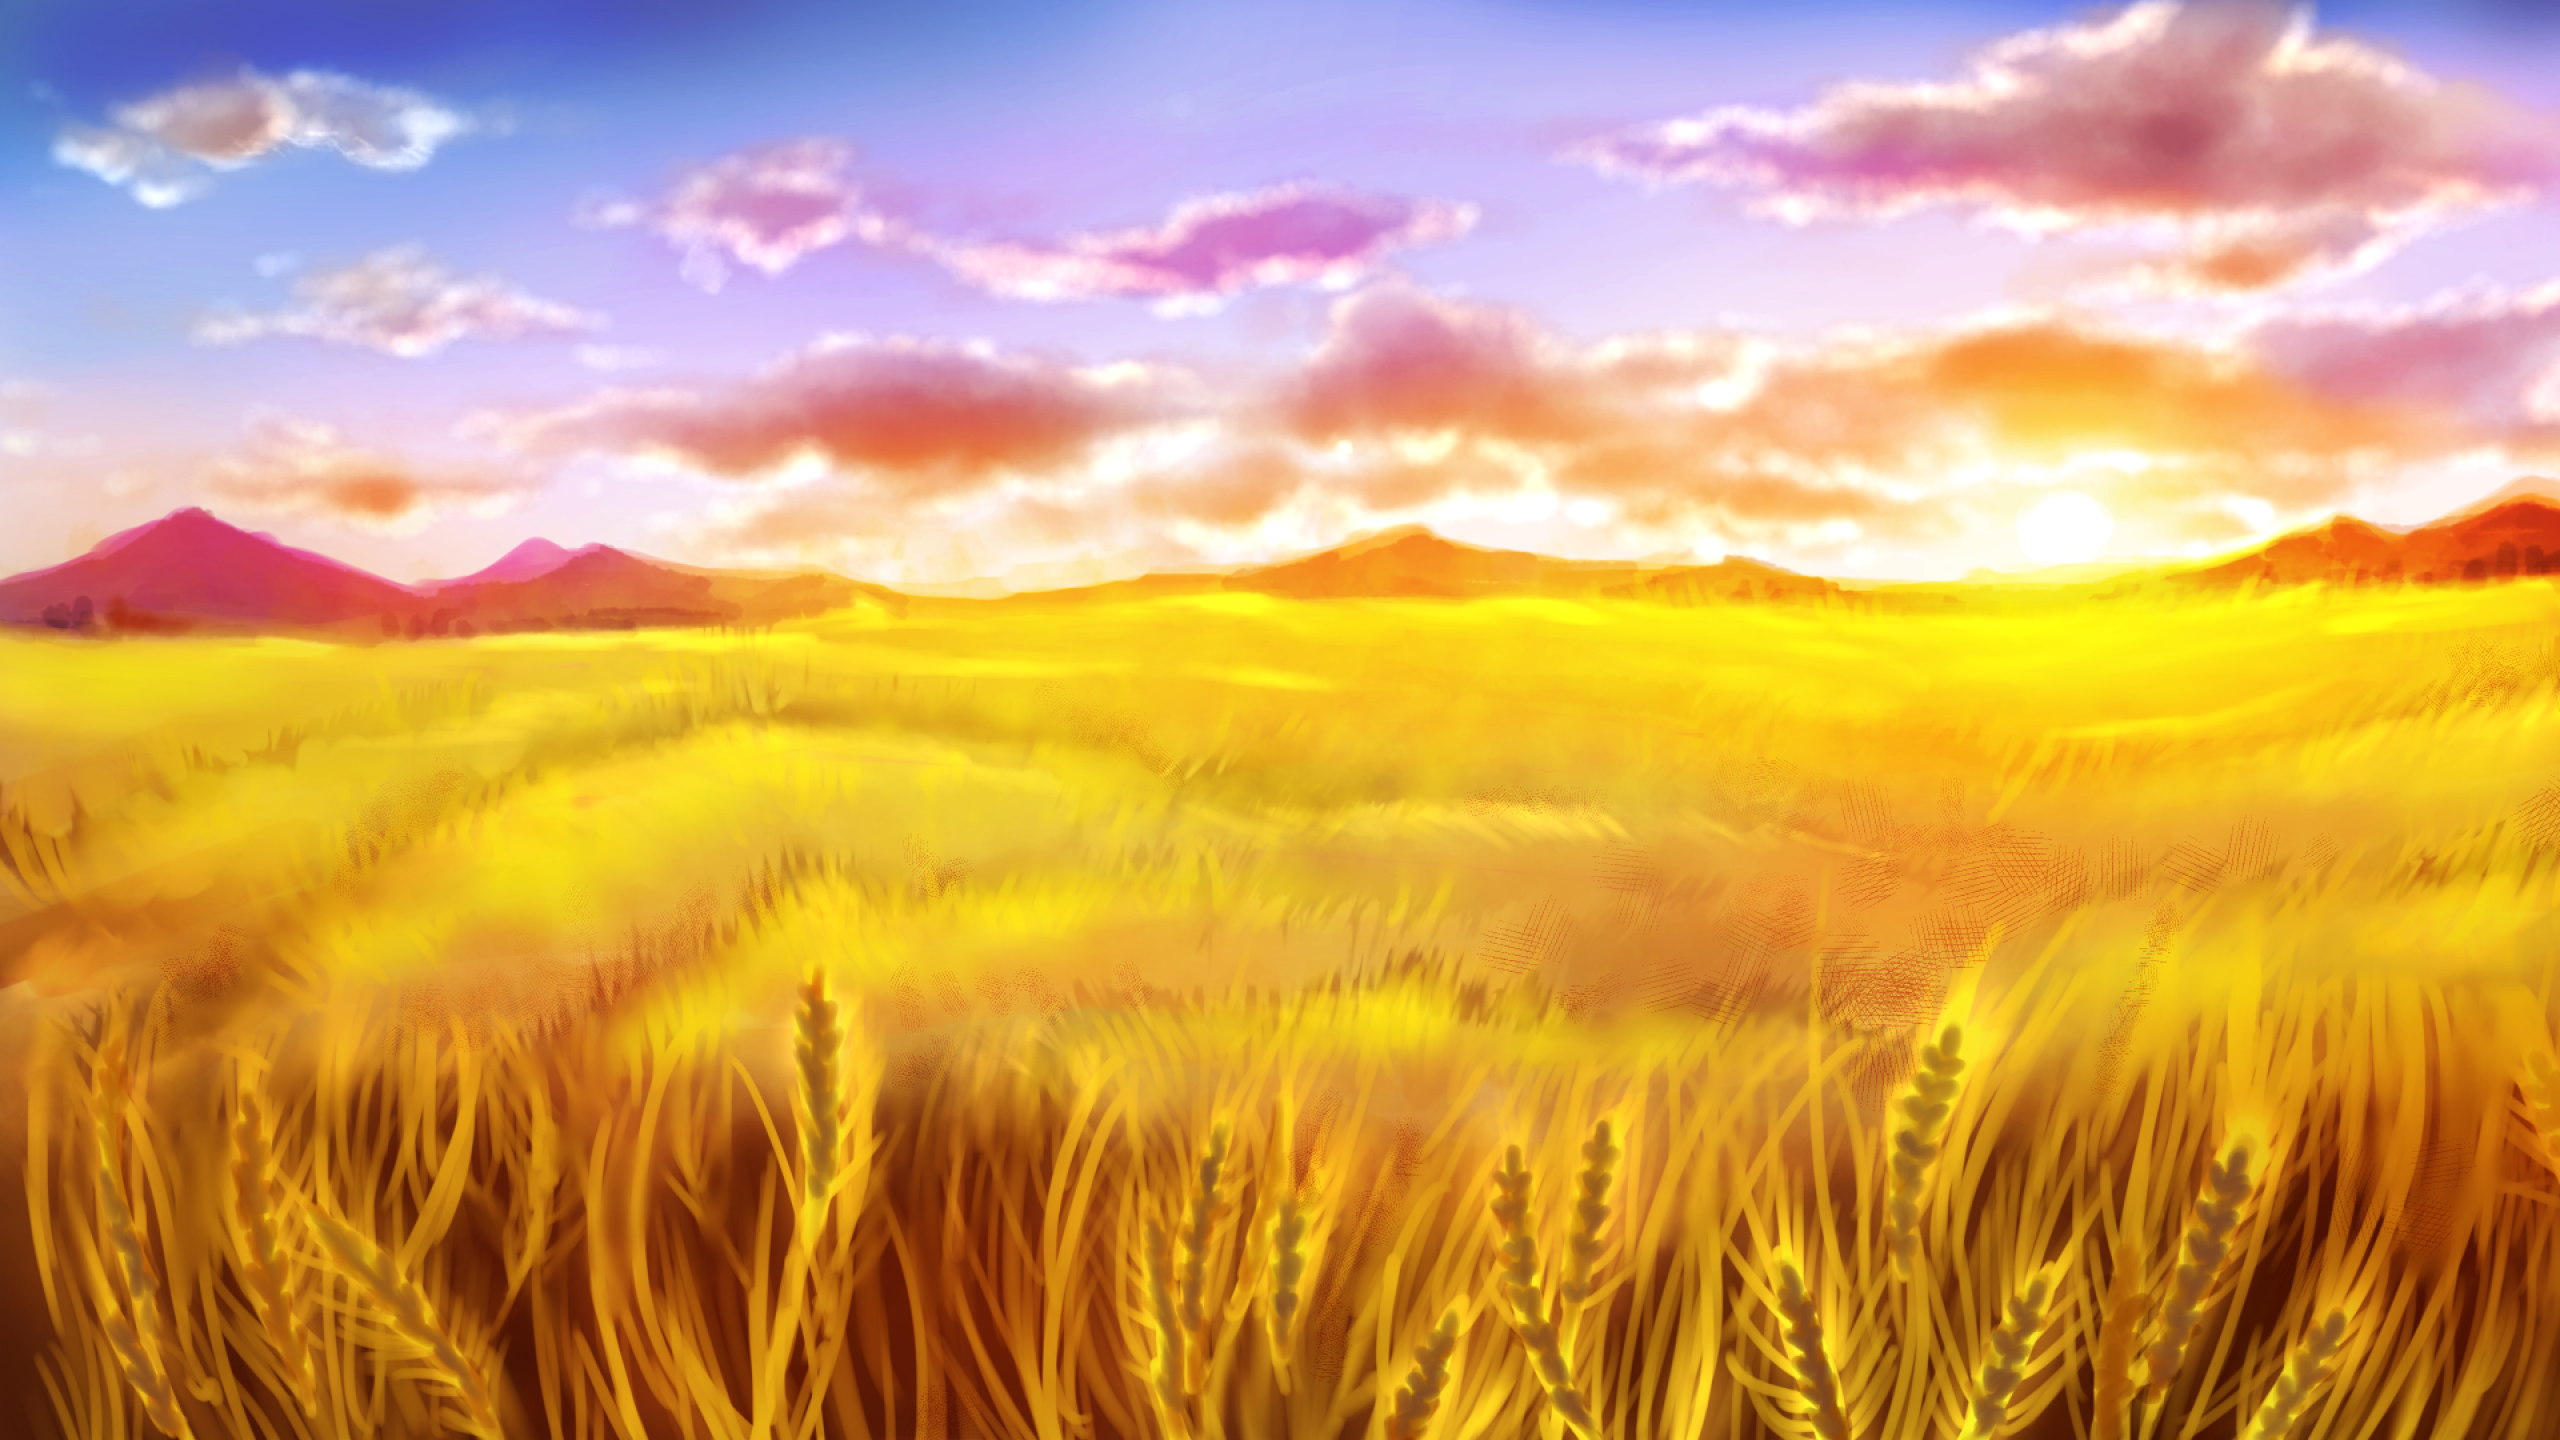 Download 2560x1440 Jaeger Sixth, Anime Landscape, Field, Clouds, Sky, Scenery Wallpaper for iMac 27 inch